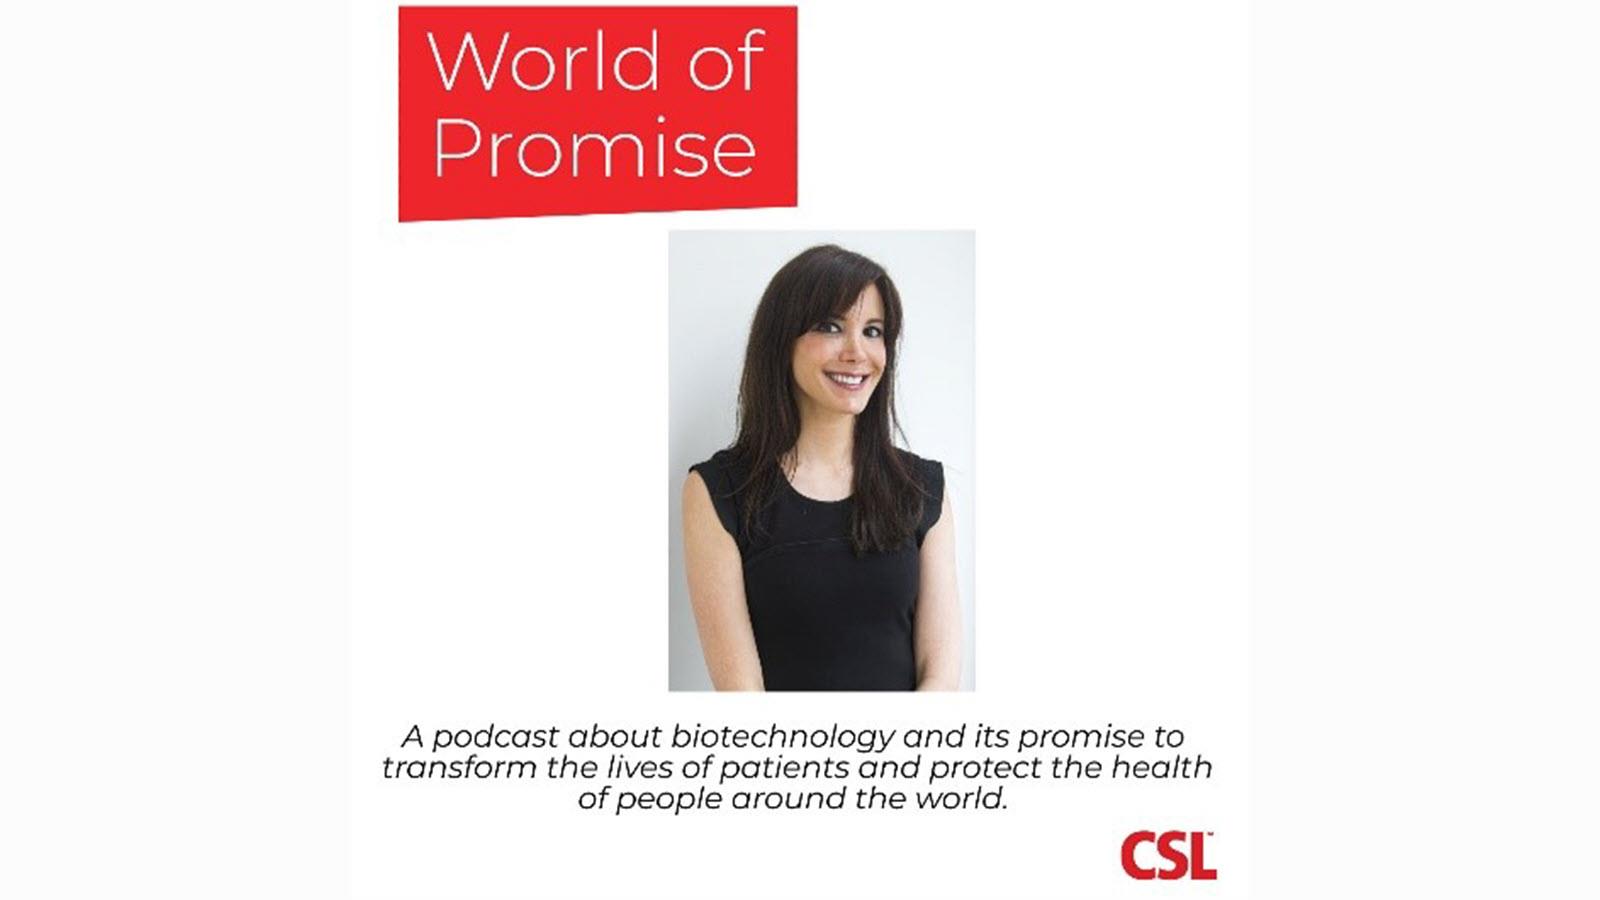 World of Promise podcast logo featuring guest, Jodi Taub, a therapist and rare disease patient